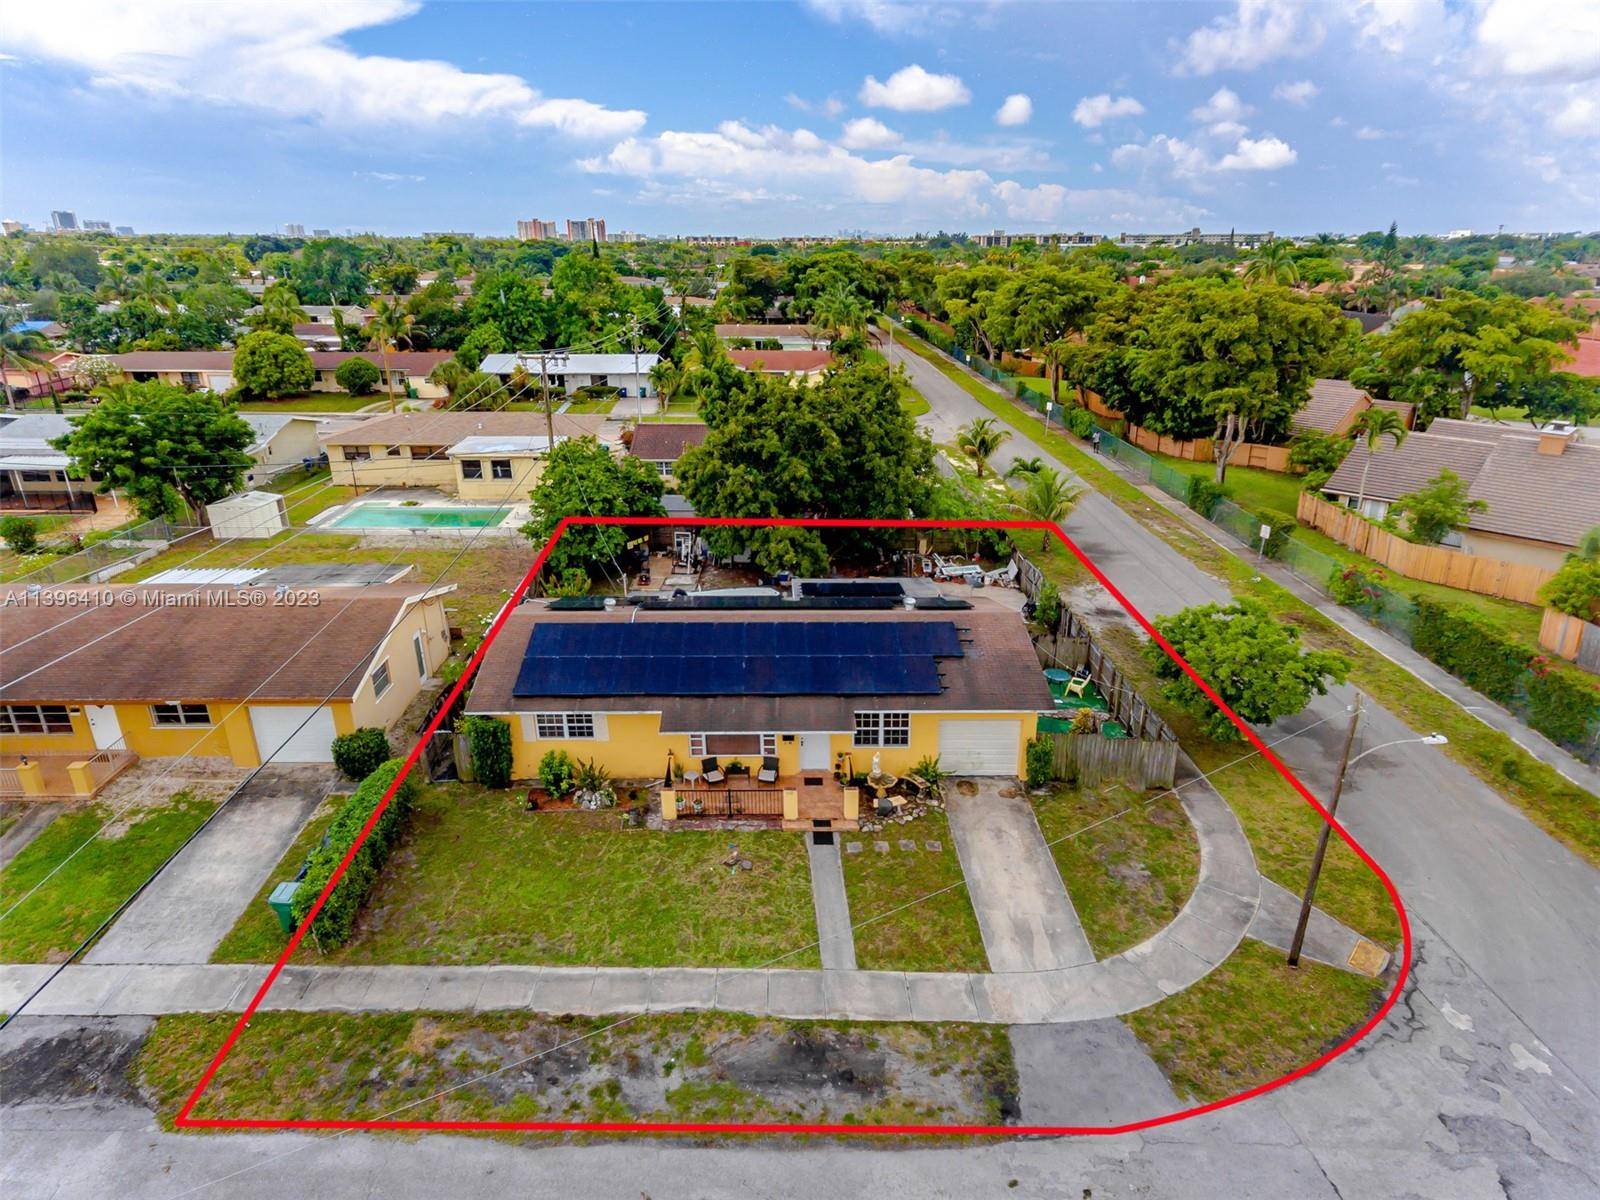 Discover a stunning 3 bed, 2 bath home in the coveted Ives Dairy neighborhood of North Miami.